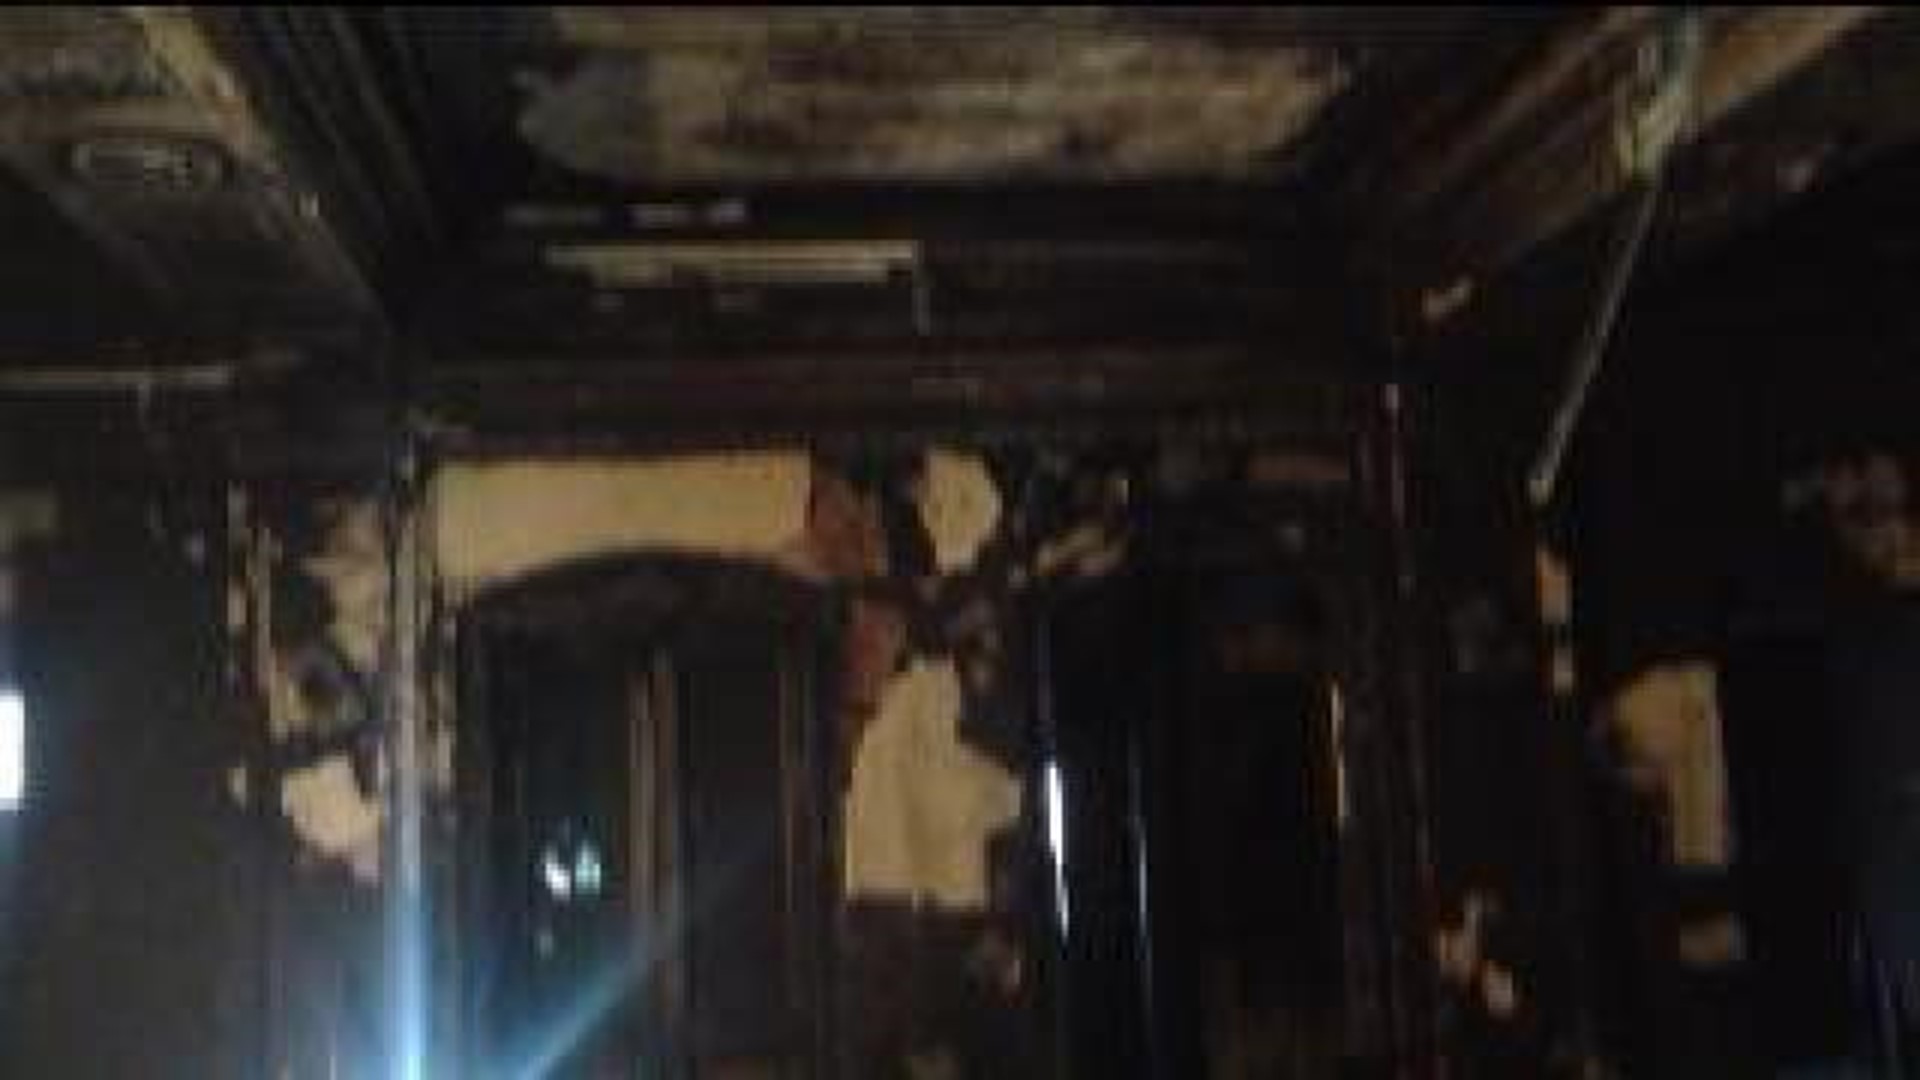 Historic Architecture Scorched By Flames in Wilkes-Barre